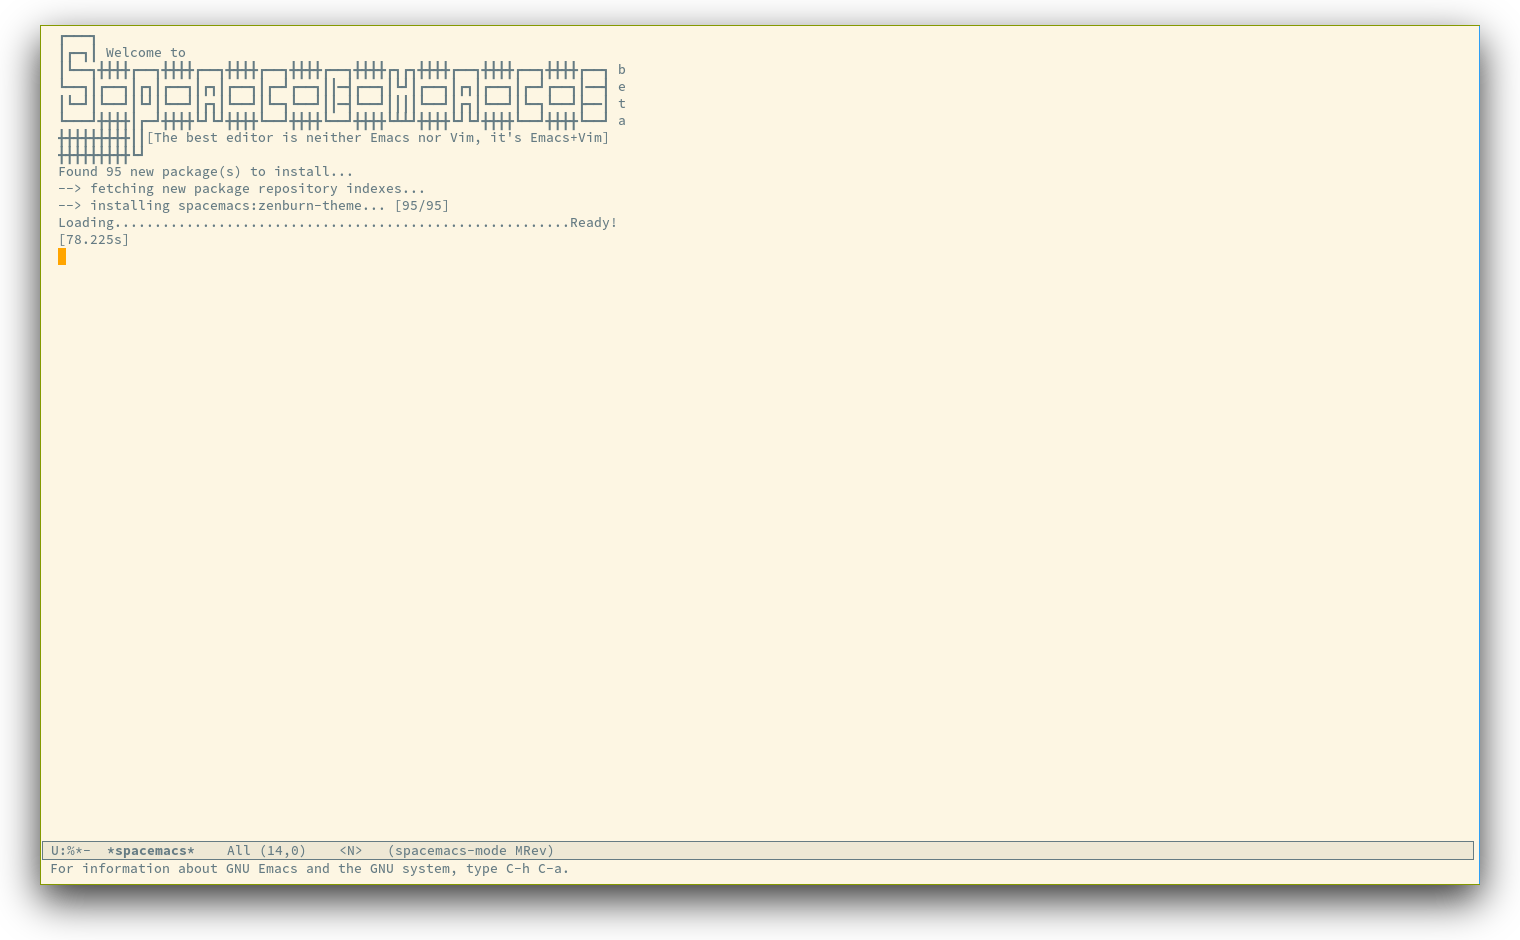 /TakeV/spacemacs/media/commit/e9ebd7e343ee2ebd961b74a5d21fb0733772d376/doc/img/spacemacs-startup.png